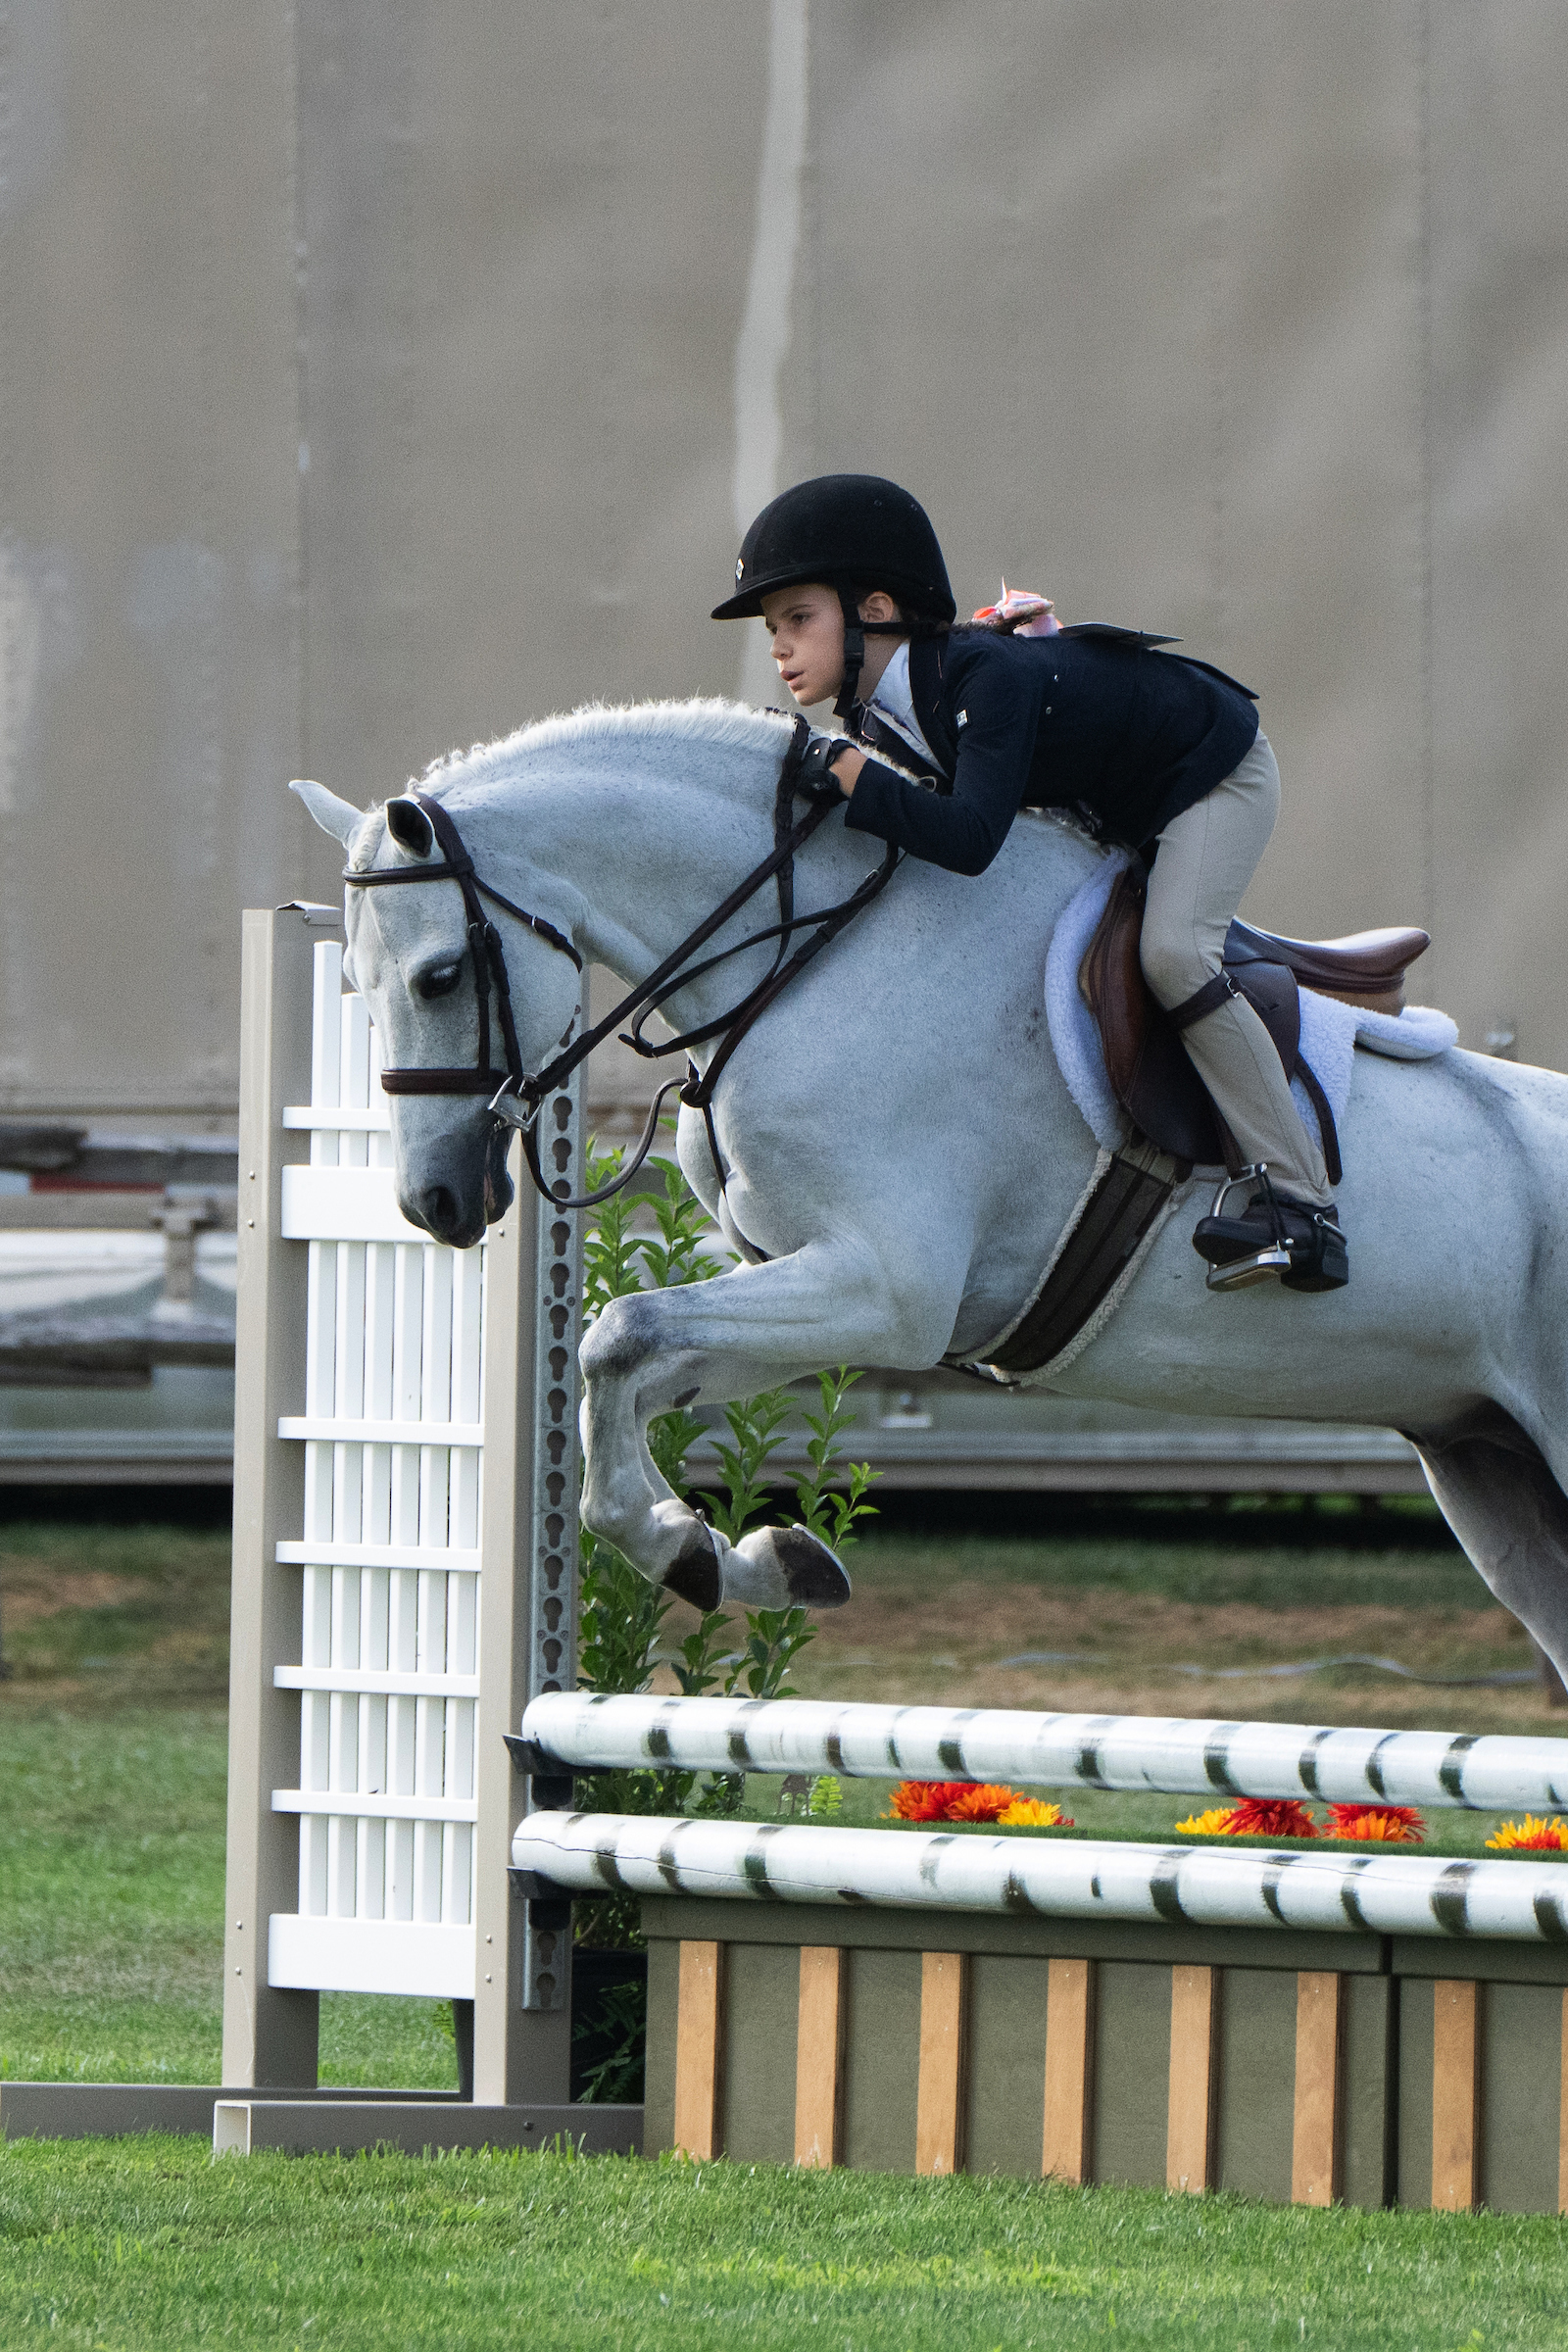 Lexie Tucci and her pony, Beyond the Bunny, were first in the under-saddle and third over fences in the children's equitation division. Tucci trains with Pamela Polk of Blue Star Equestrian. LORI HAWKINS